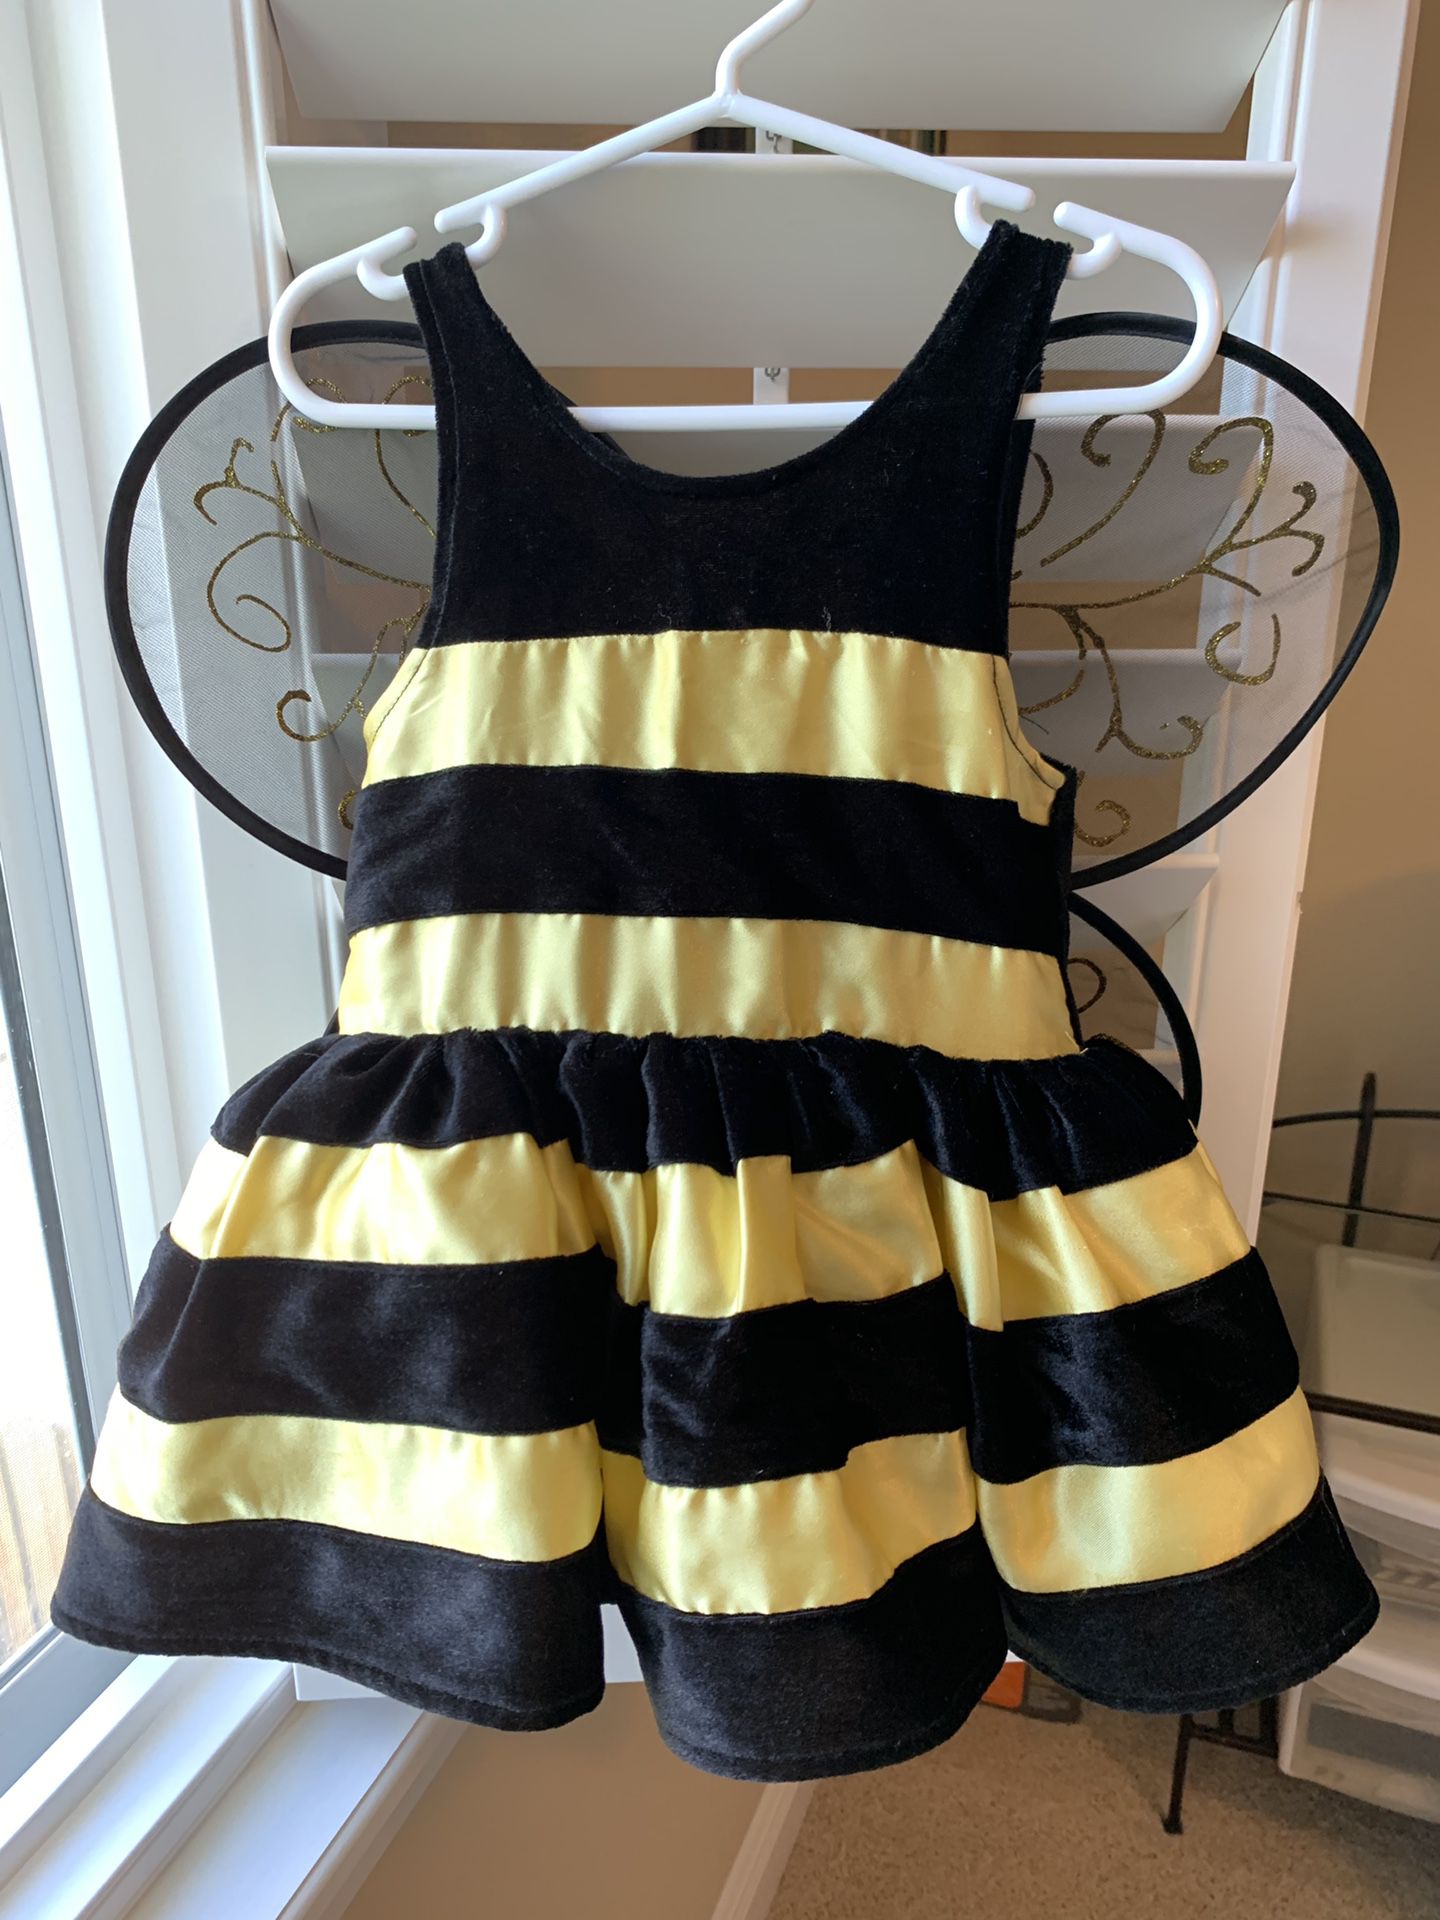 Size 2T girls bumblebee costume, great for dress up or Halloween